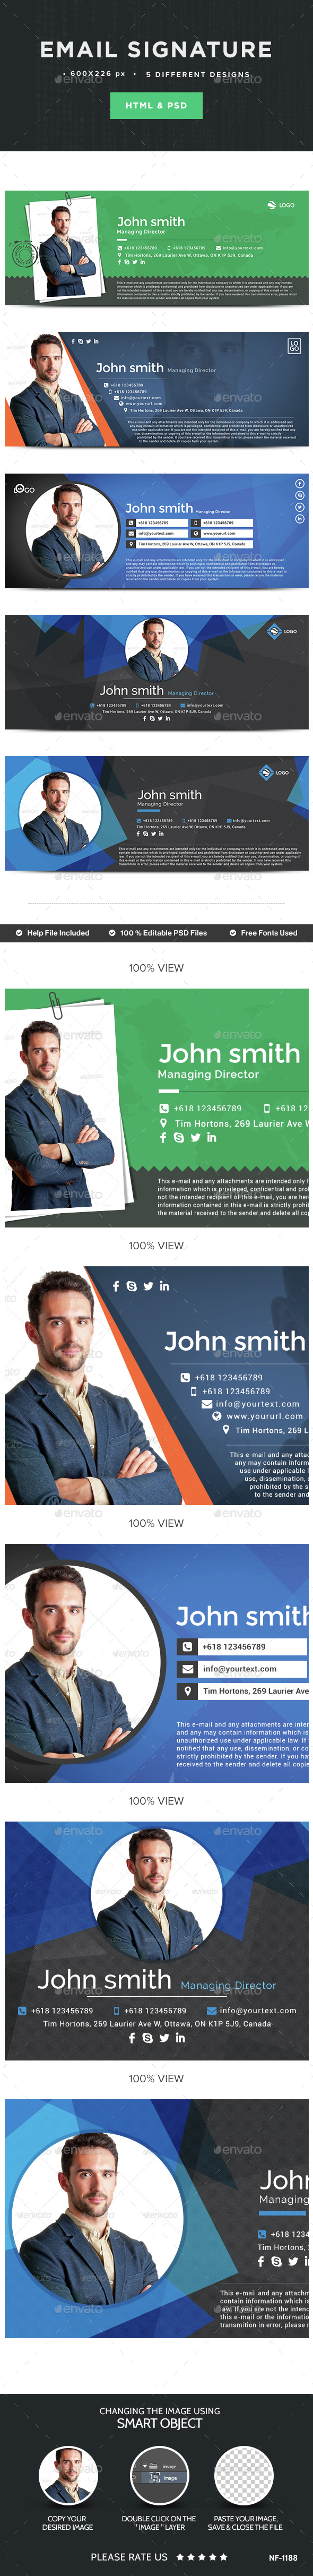 Email Signature - 5 Designs - HTML Files Included